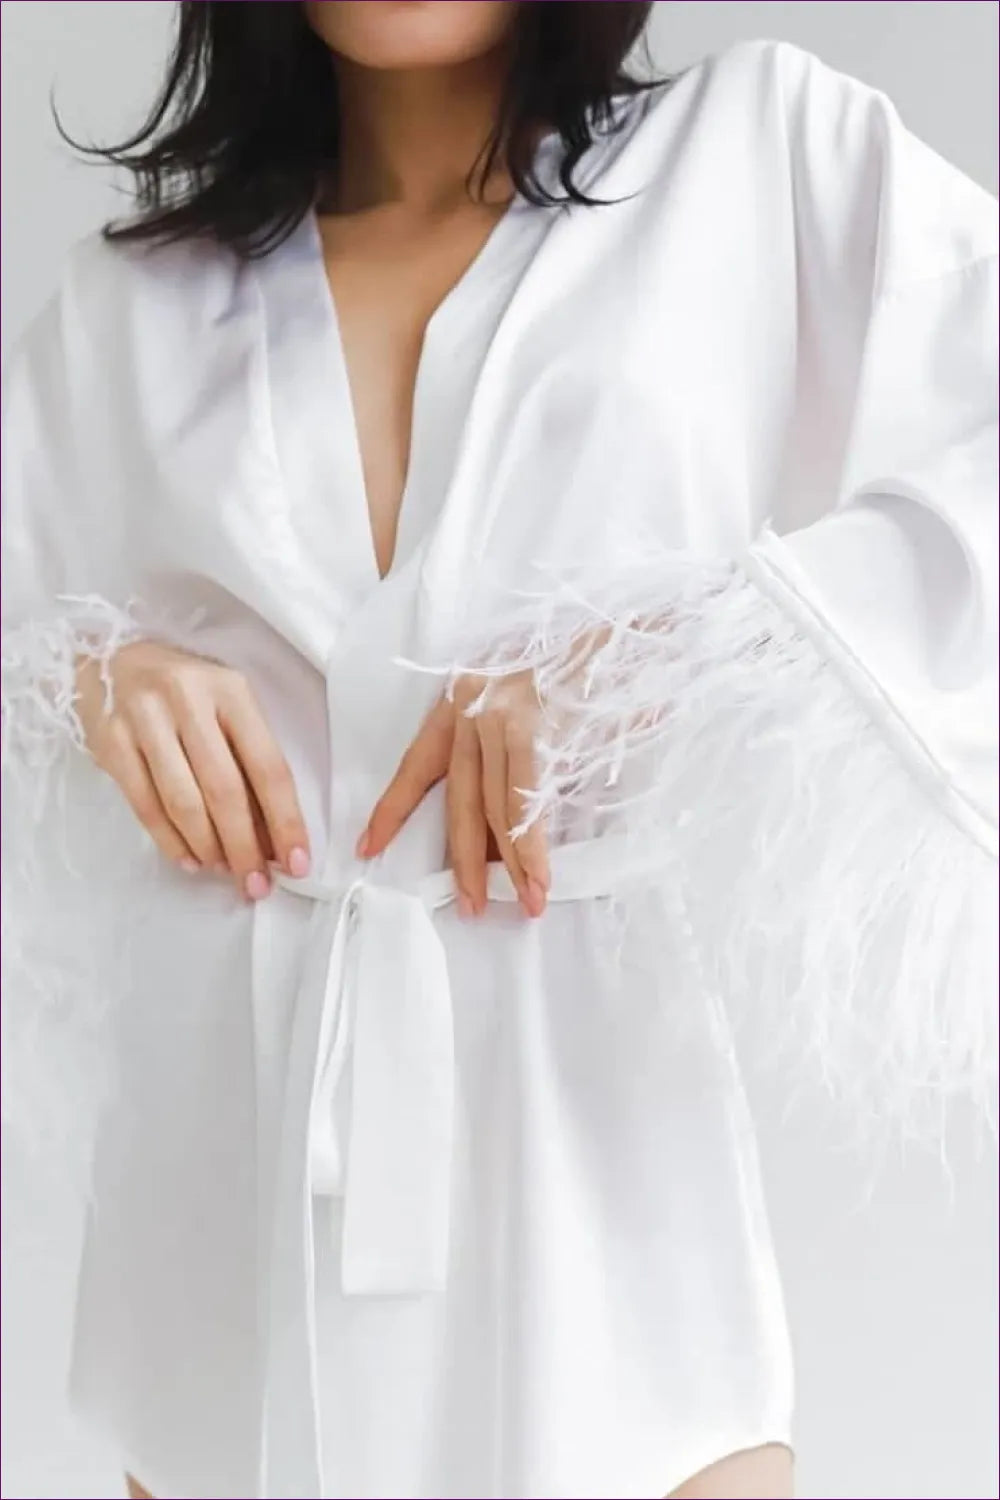 Experience Unparalleled Luxury With Our Feather Silk Night Robe, Designed To Keep You Feeling Sumptuous